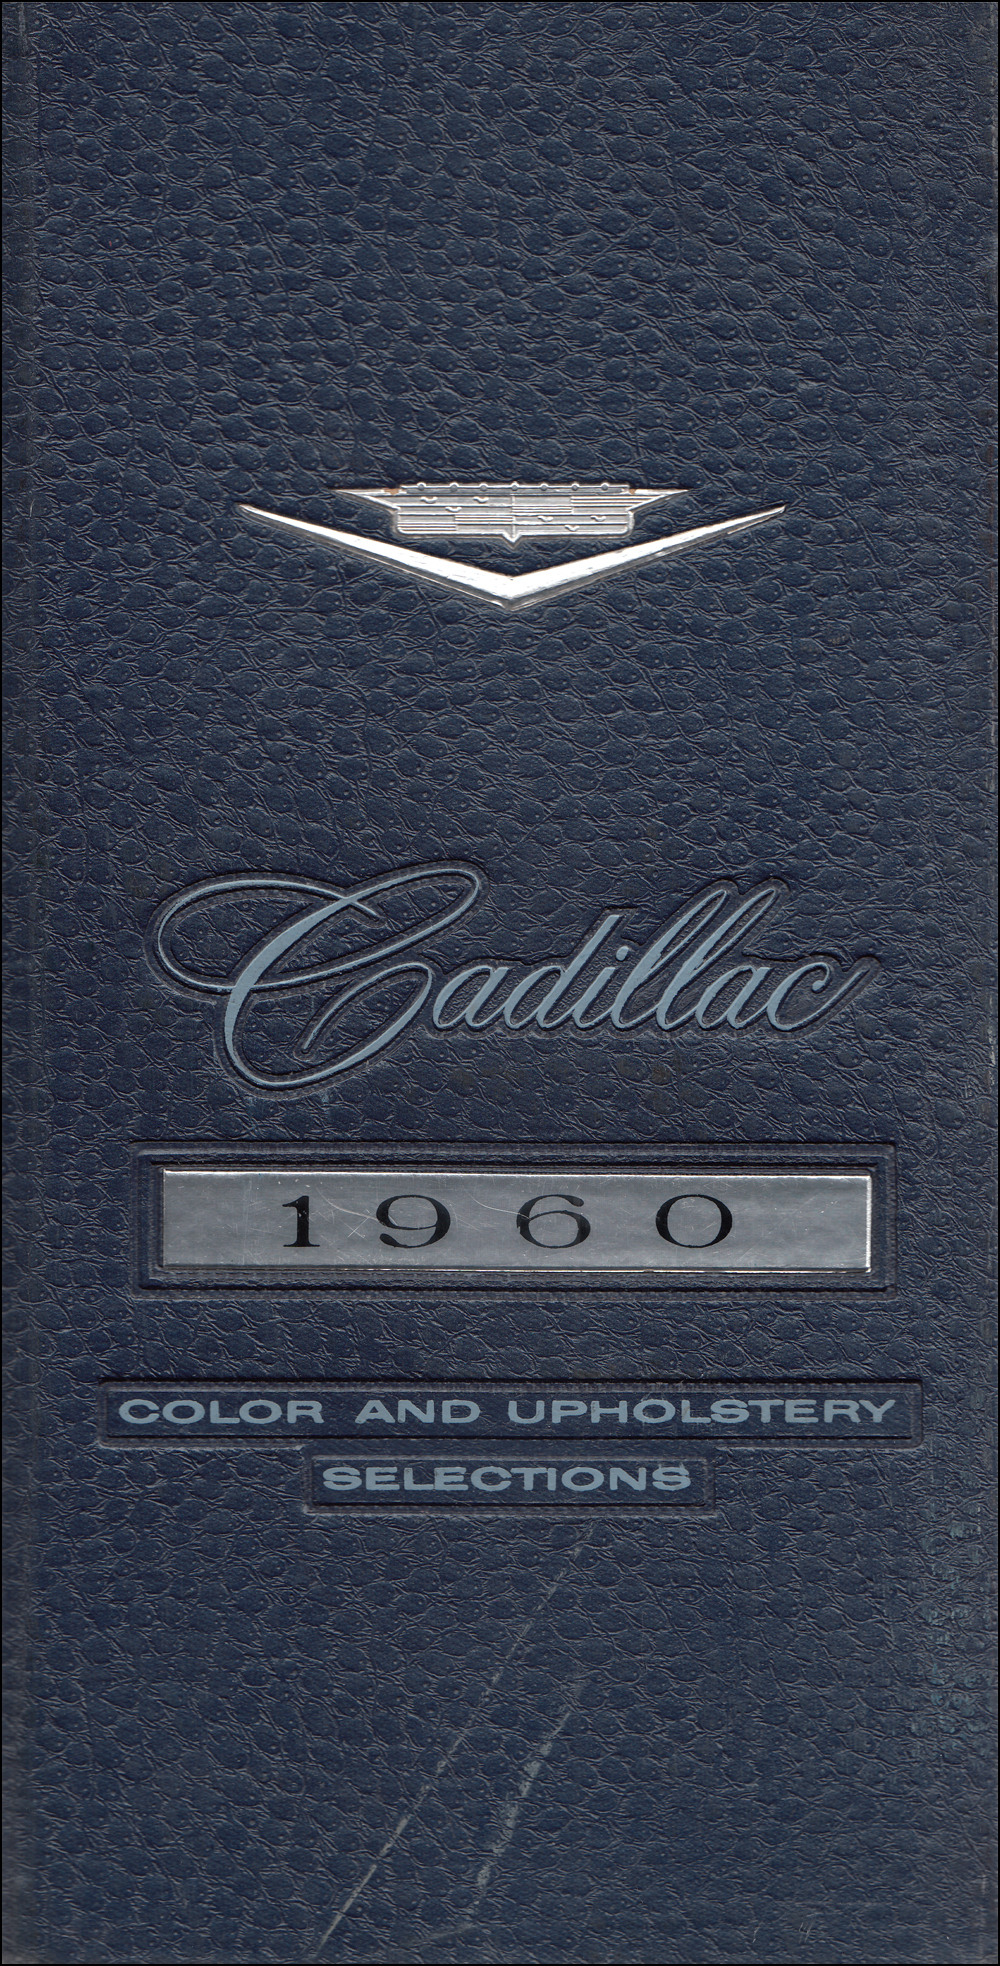 1960 Cadillac Color and Upholstery Dealer Album Small Size